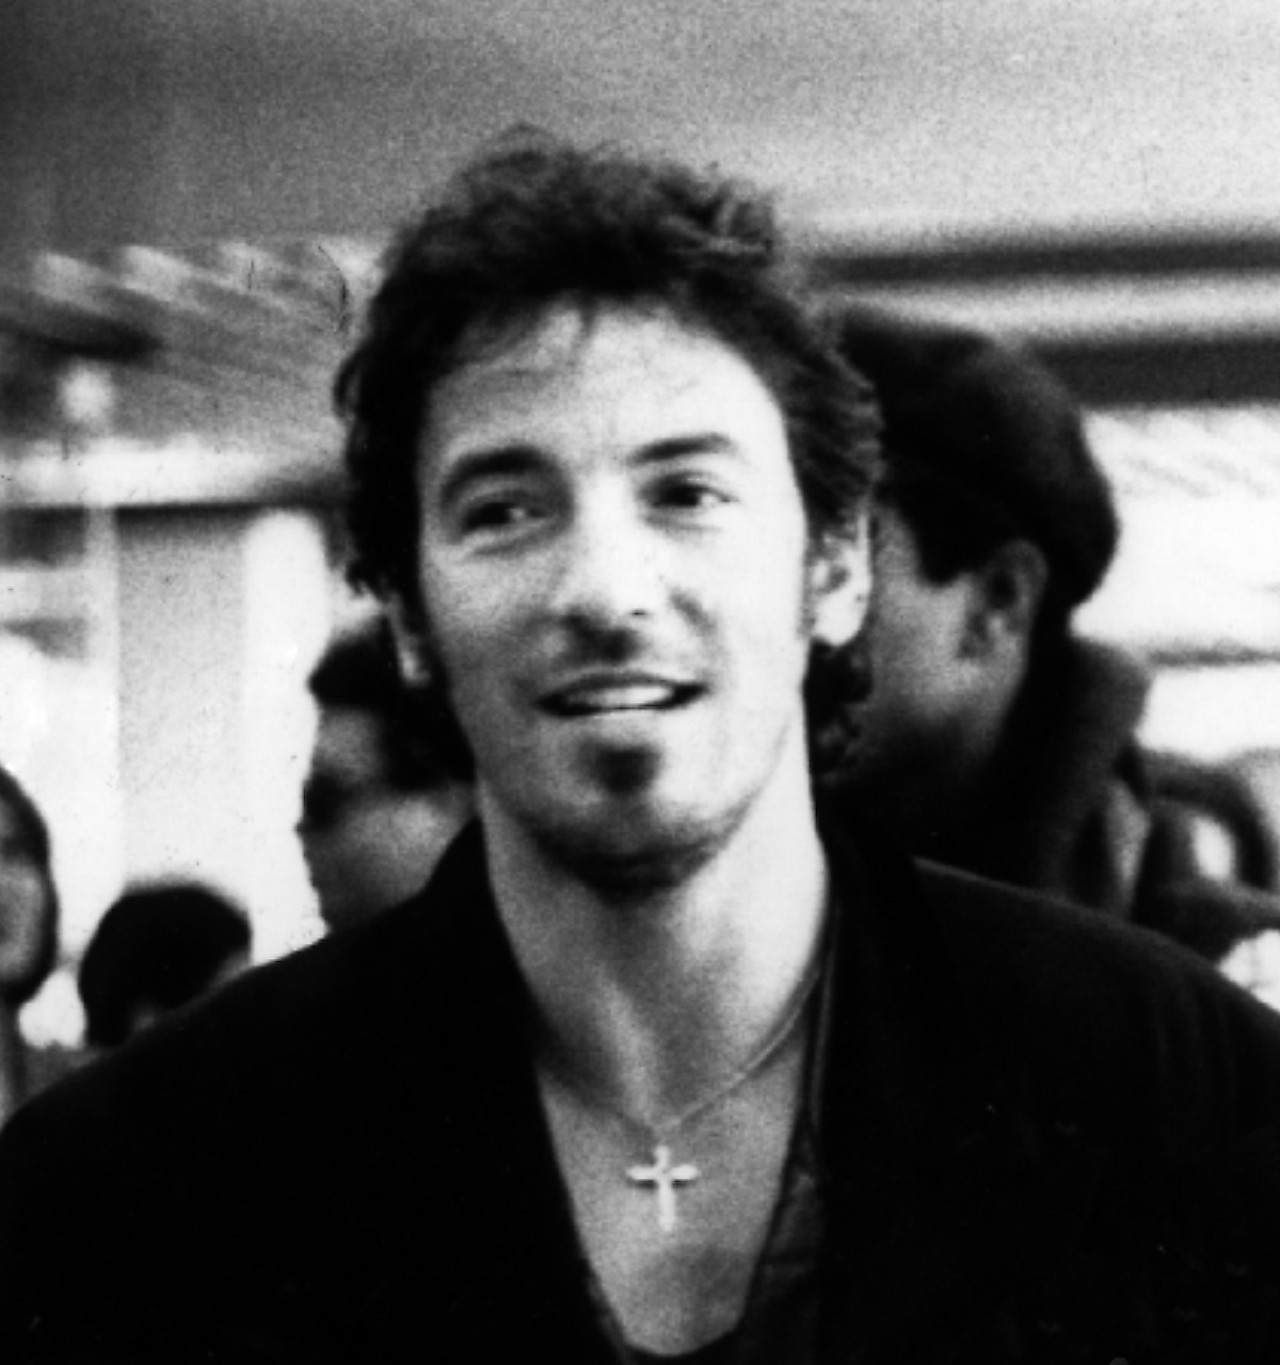 Thursday, 4/14
Bruce Springsteen and the E Street Band
@ The Palace
We realize that you don&#146;t need any introduction to legend Bruce Springsteen and his even more legendary E Street Band, but the Boss is returning to Detroit this week, and we can guarantee it&#146;ll be pretty special. Springsteen is celebrating the 35th anniversary of The River with the recent release of Ties That Bind: The River Collection &#151; a box set that contains the original album, unreleased songs, and a two-hour concert film from 1980. Tonight, Springsteen and Co. will perform the entire album front to back before kicking into their classic canon with songs like &#147;Born to Run&#148; and &#147;Dancing in the Dark.&#148; Be prepared: setlists for this tour have been very long, with the band playing up to three and a half hours. But if you&#146;re a die hard Springsteen fan, that won&#146;t be an issue at all.
Doors at 7:30 p.m.; 6 Championship Dr., Auburn Hills; Tickets $36-$150.